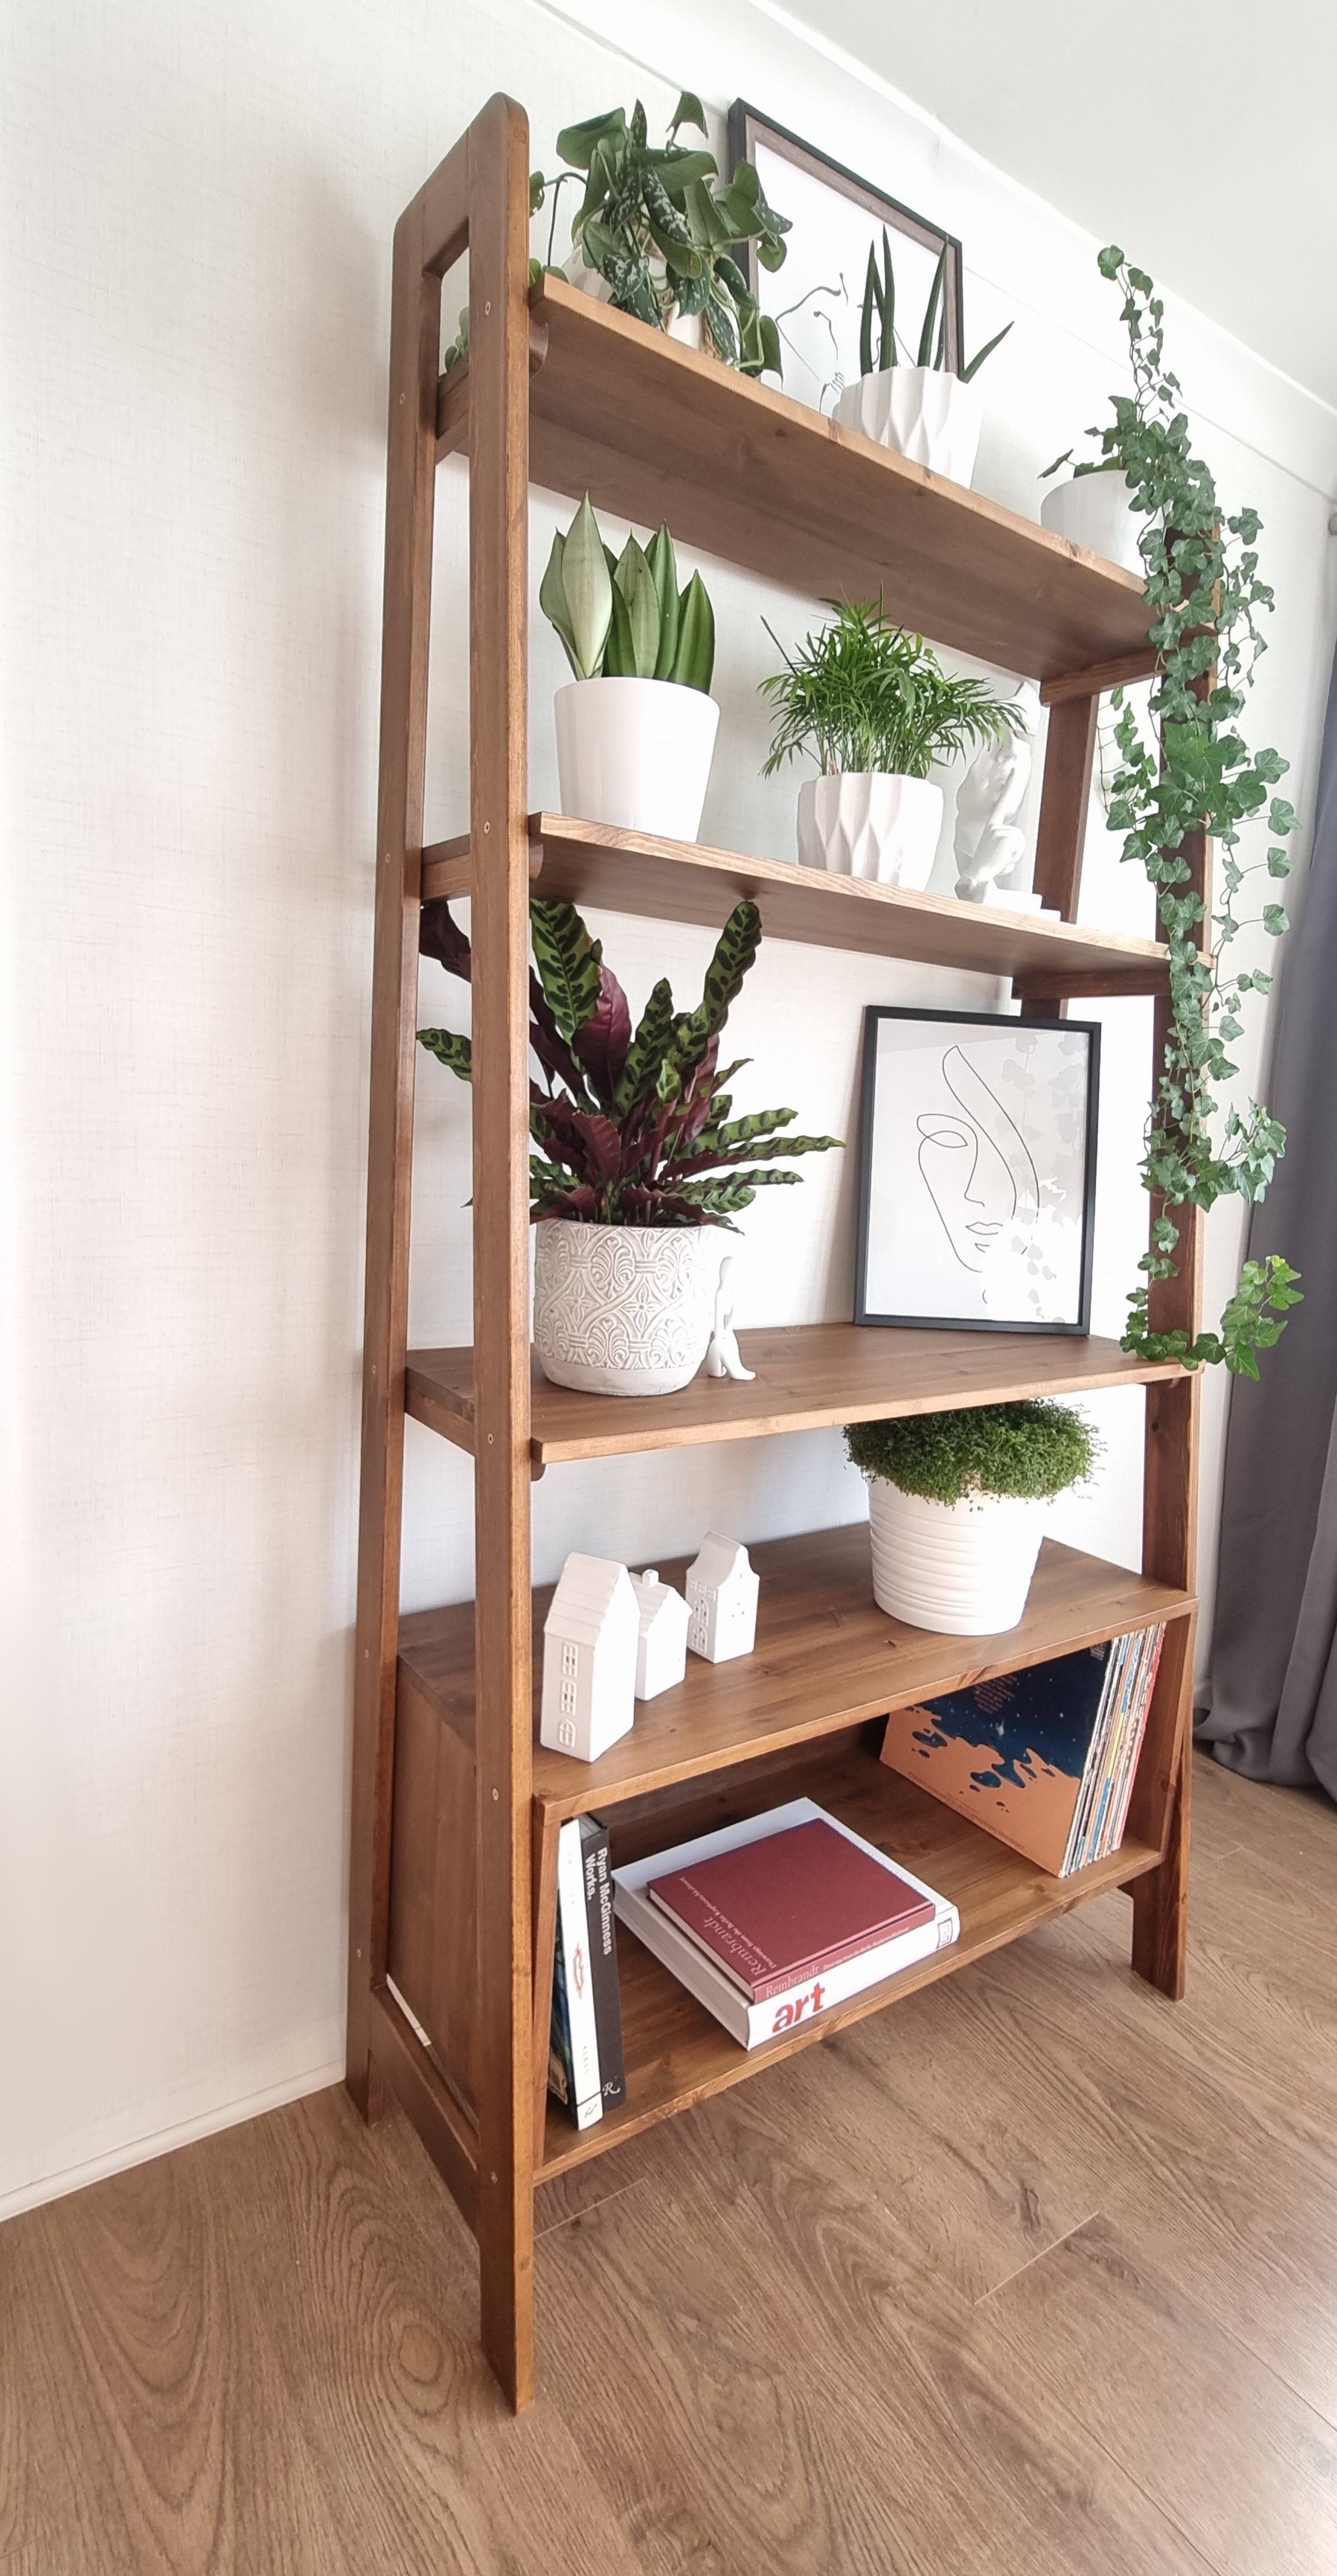 Wooden Free Standing Mid-Century Modern Wall Unit with Shelves and Storage Space COLOUR FURNITURE 